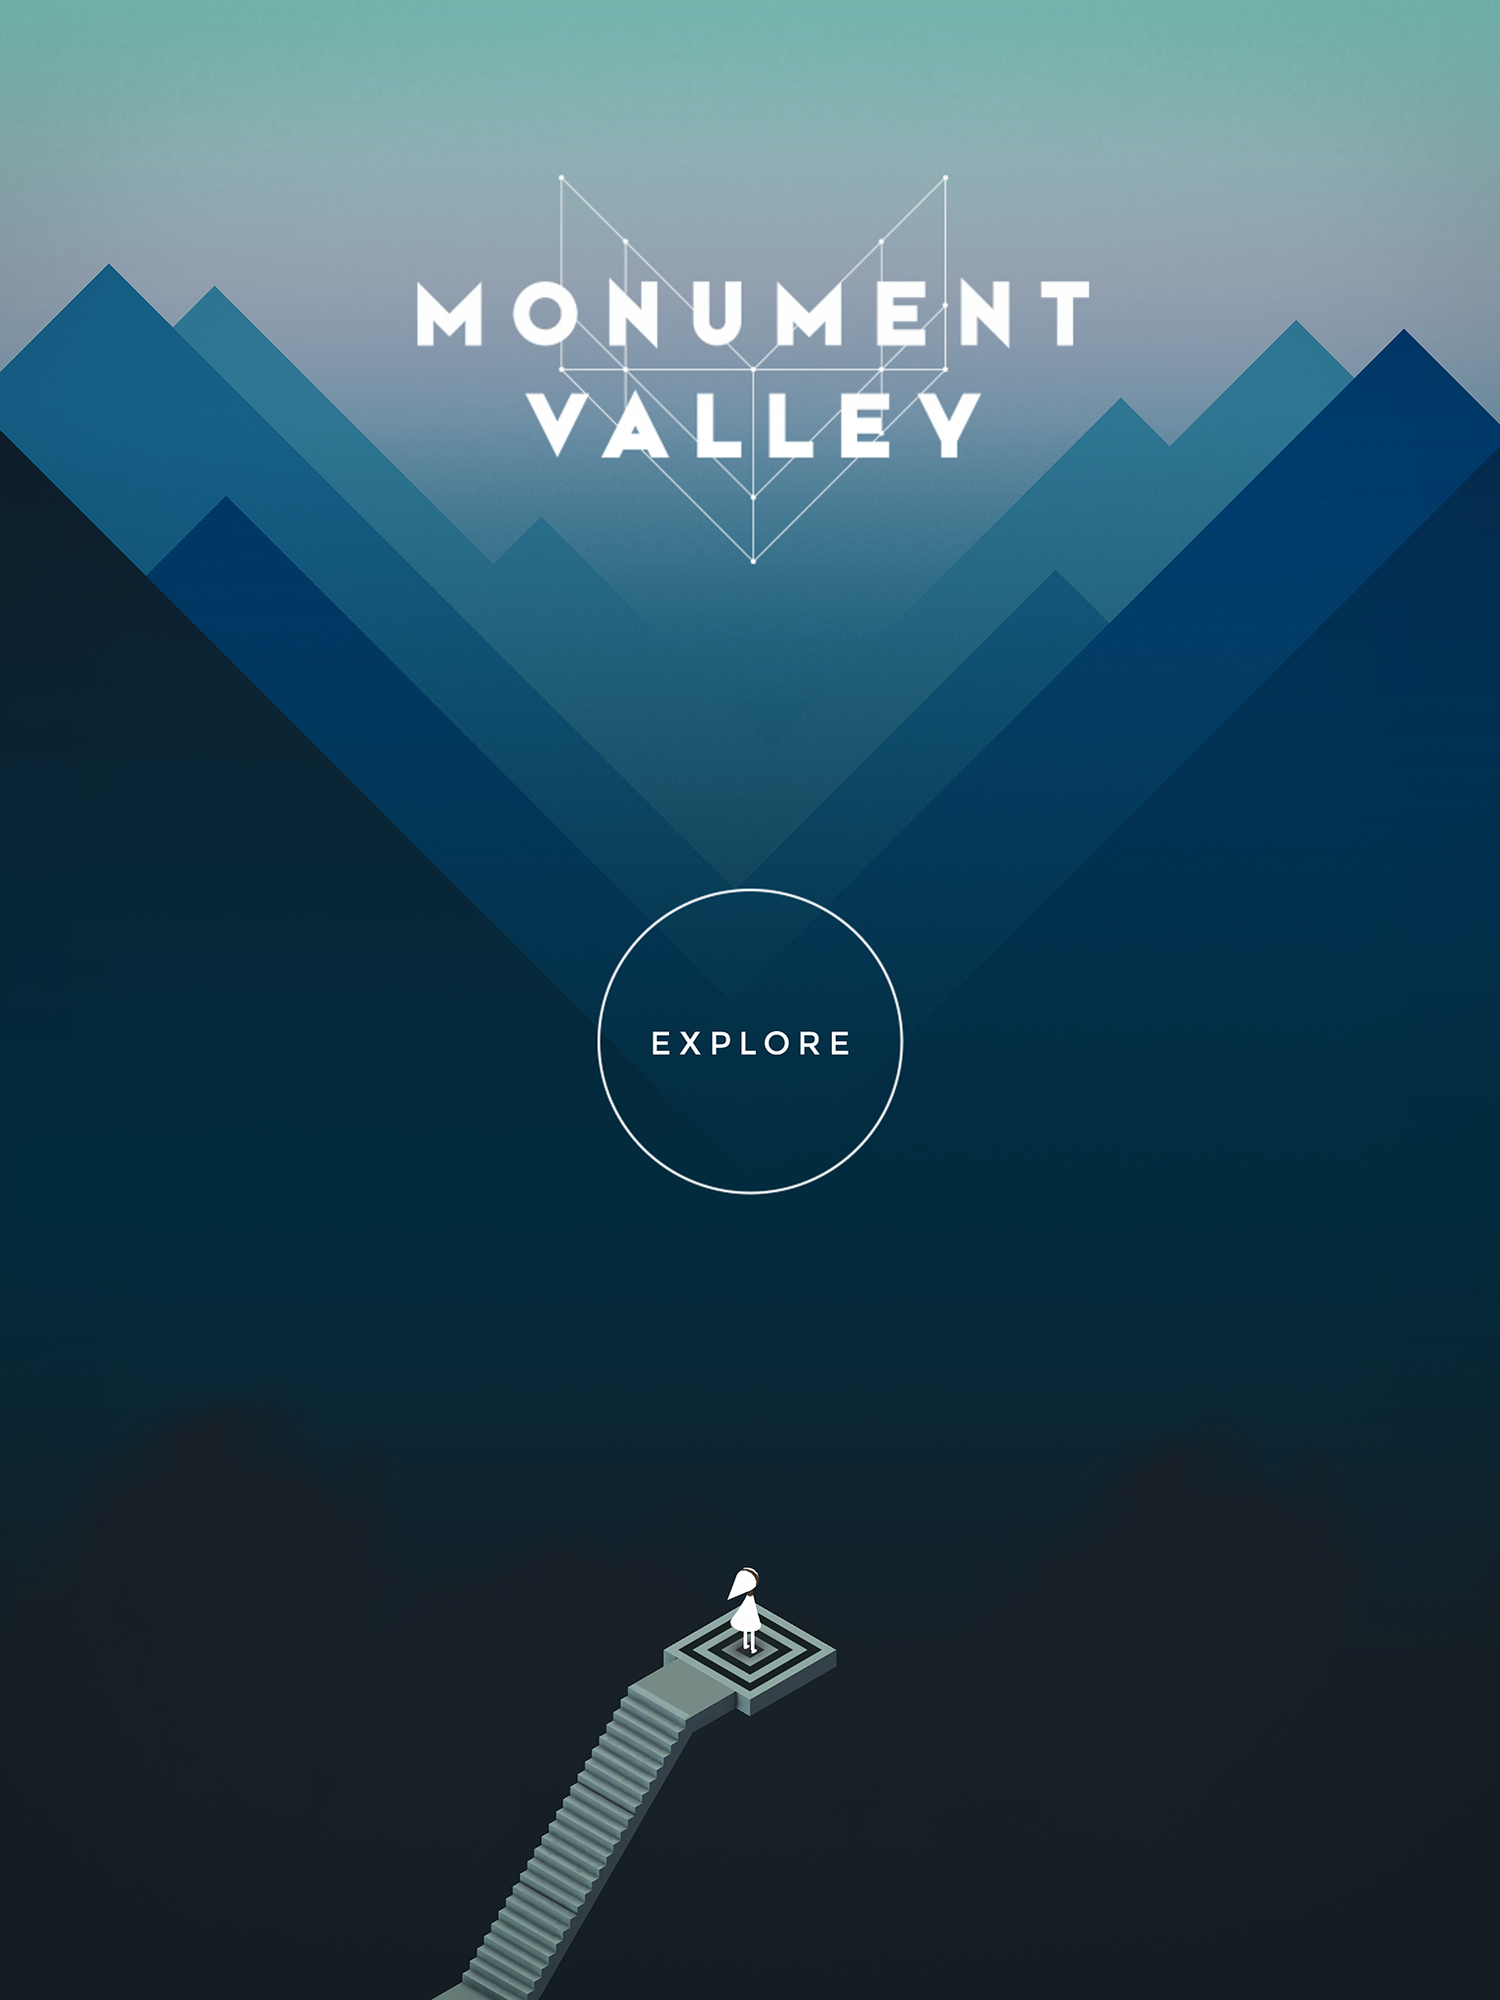 Monument Valley A Video Game About Impossible Architecture The Fox